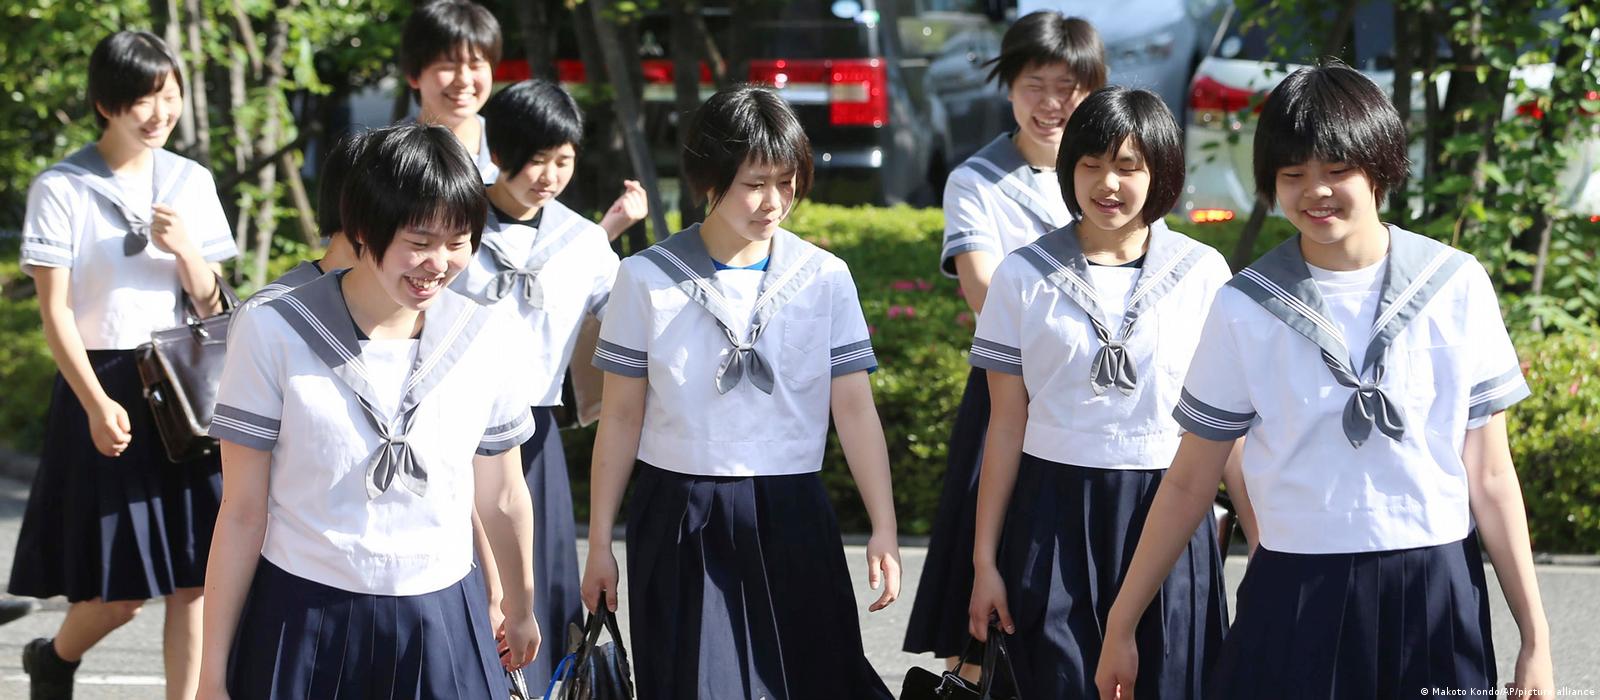 Japan's strict rules on student hairstyles draw controversy â€“ DW â€“  06/13/2022